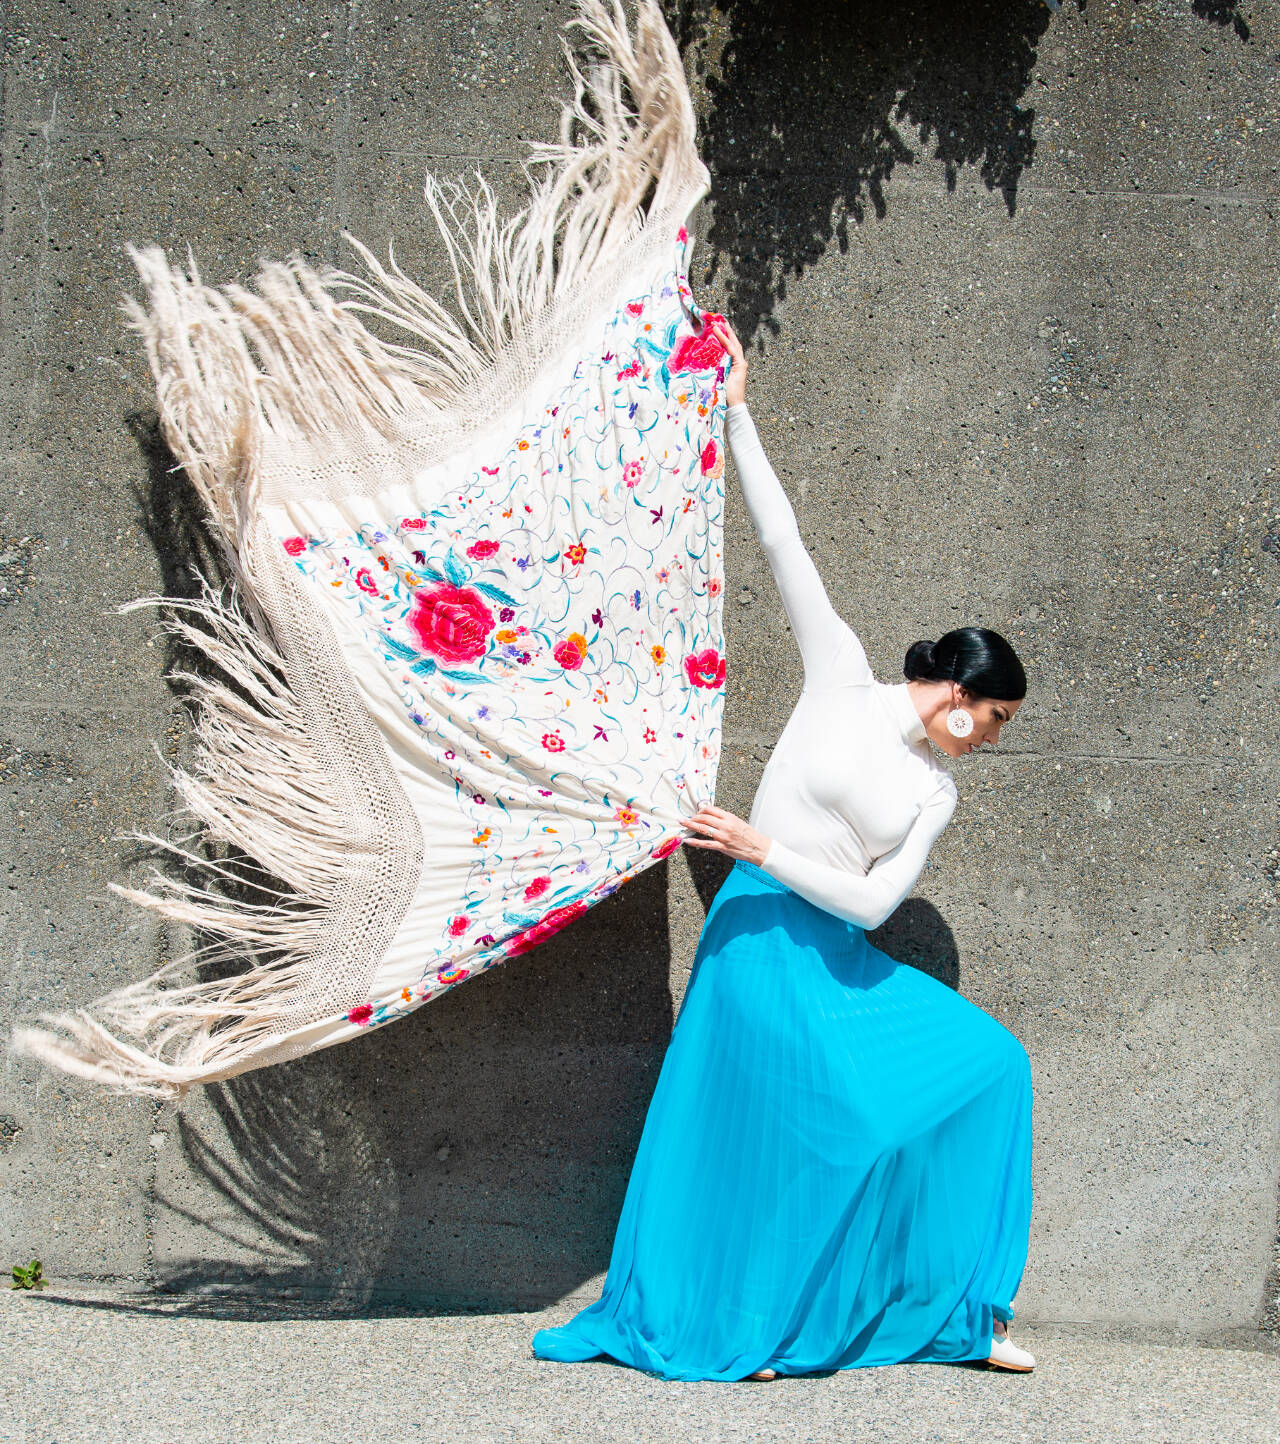 Photo courtesy of Savannah Fuentes / Seattle-based Flamenco dancer Savannah Fuentes and singer/multi-instrumentalist Diego Amador Jr. of Seville come to the Olympic Peninsula for two performances later this month.